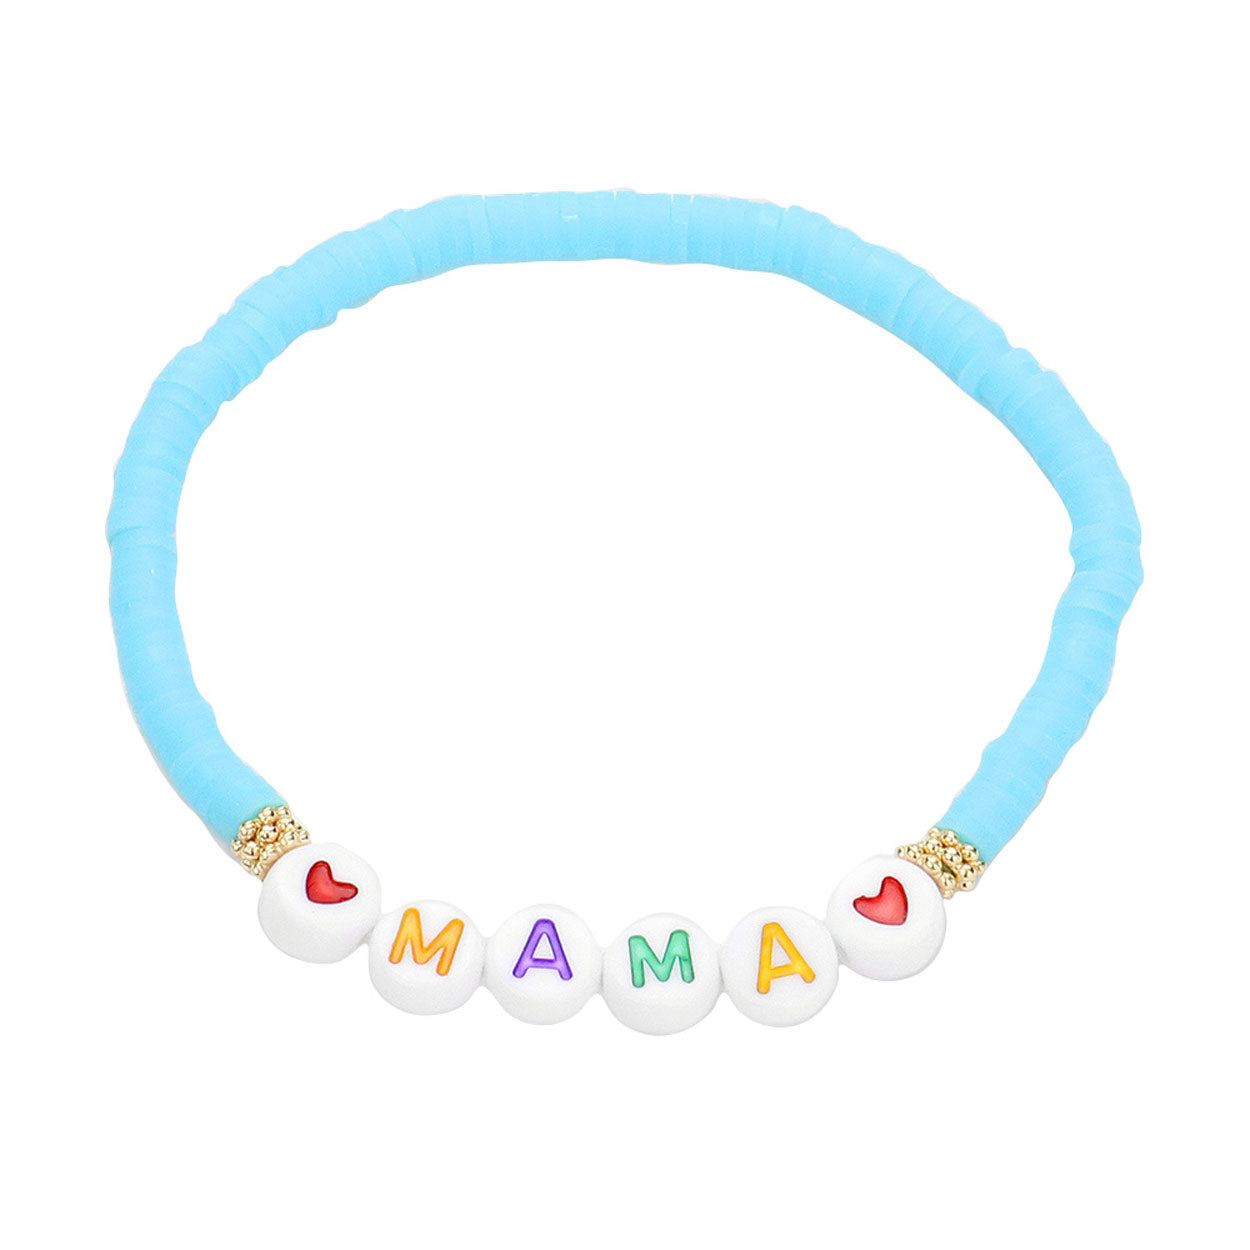 Light Blue MAMA Heishi Beaded Message Stretch Bracelet. Simple sophistication gives a lovely fashionable glow to any outfit style to your mom. Make your mom feel special with this gorgeous Bracelet gift! Her heart will swell with joy!Designed to enhance the look and add a gorgeous attractive shine to any clothing style. Perfect Birthday Gift, Anniversary Gift, Mother's Day Gift, Just Because Gift or Any Other Events.